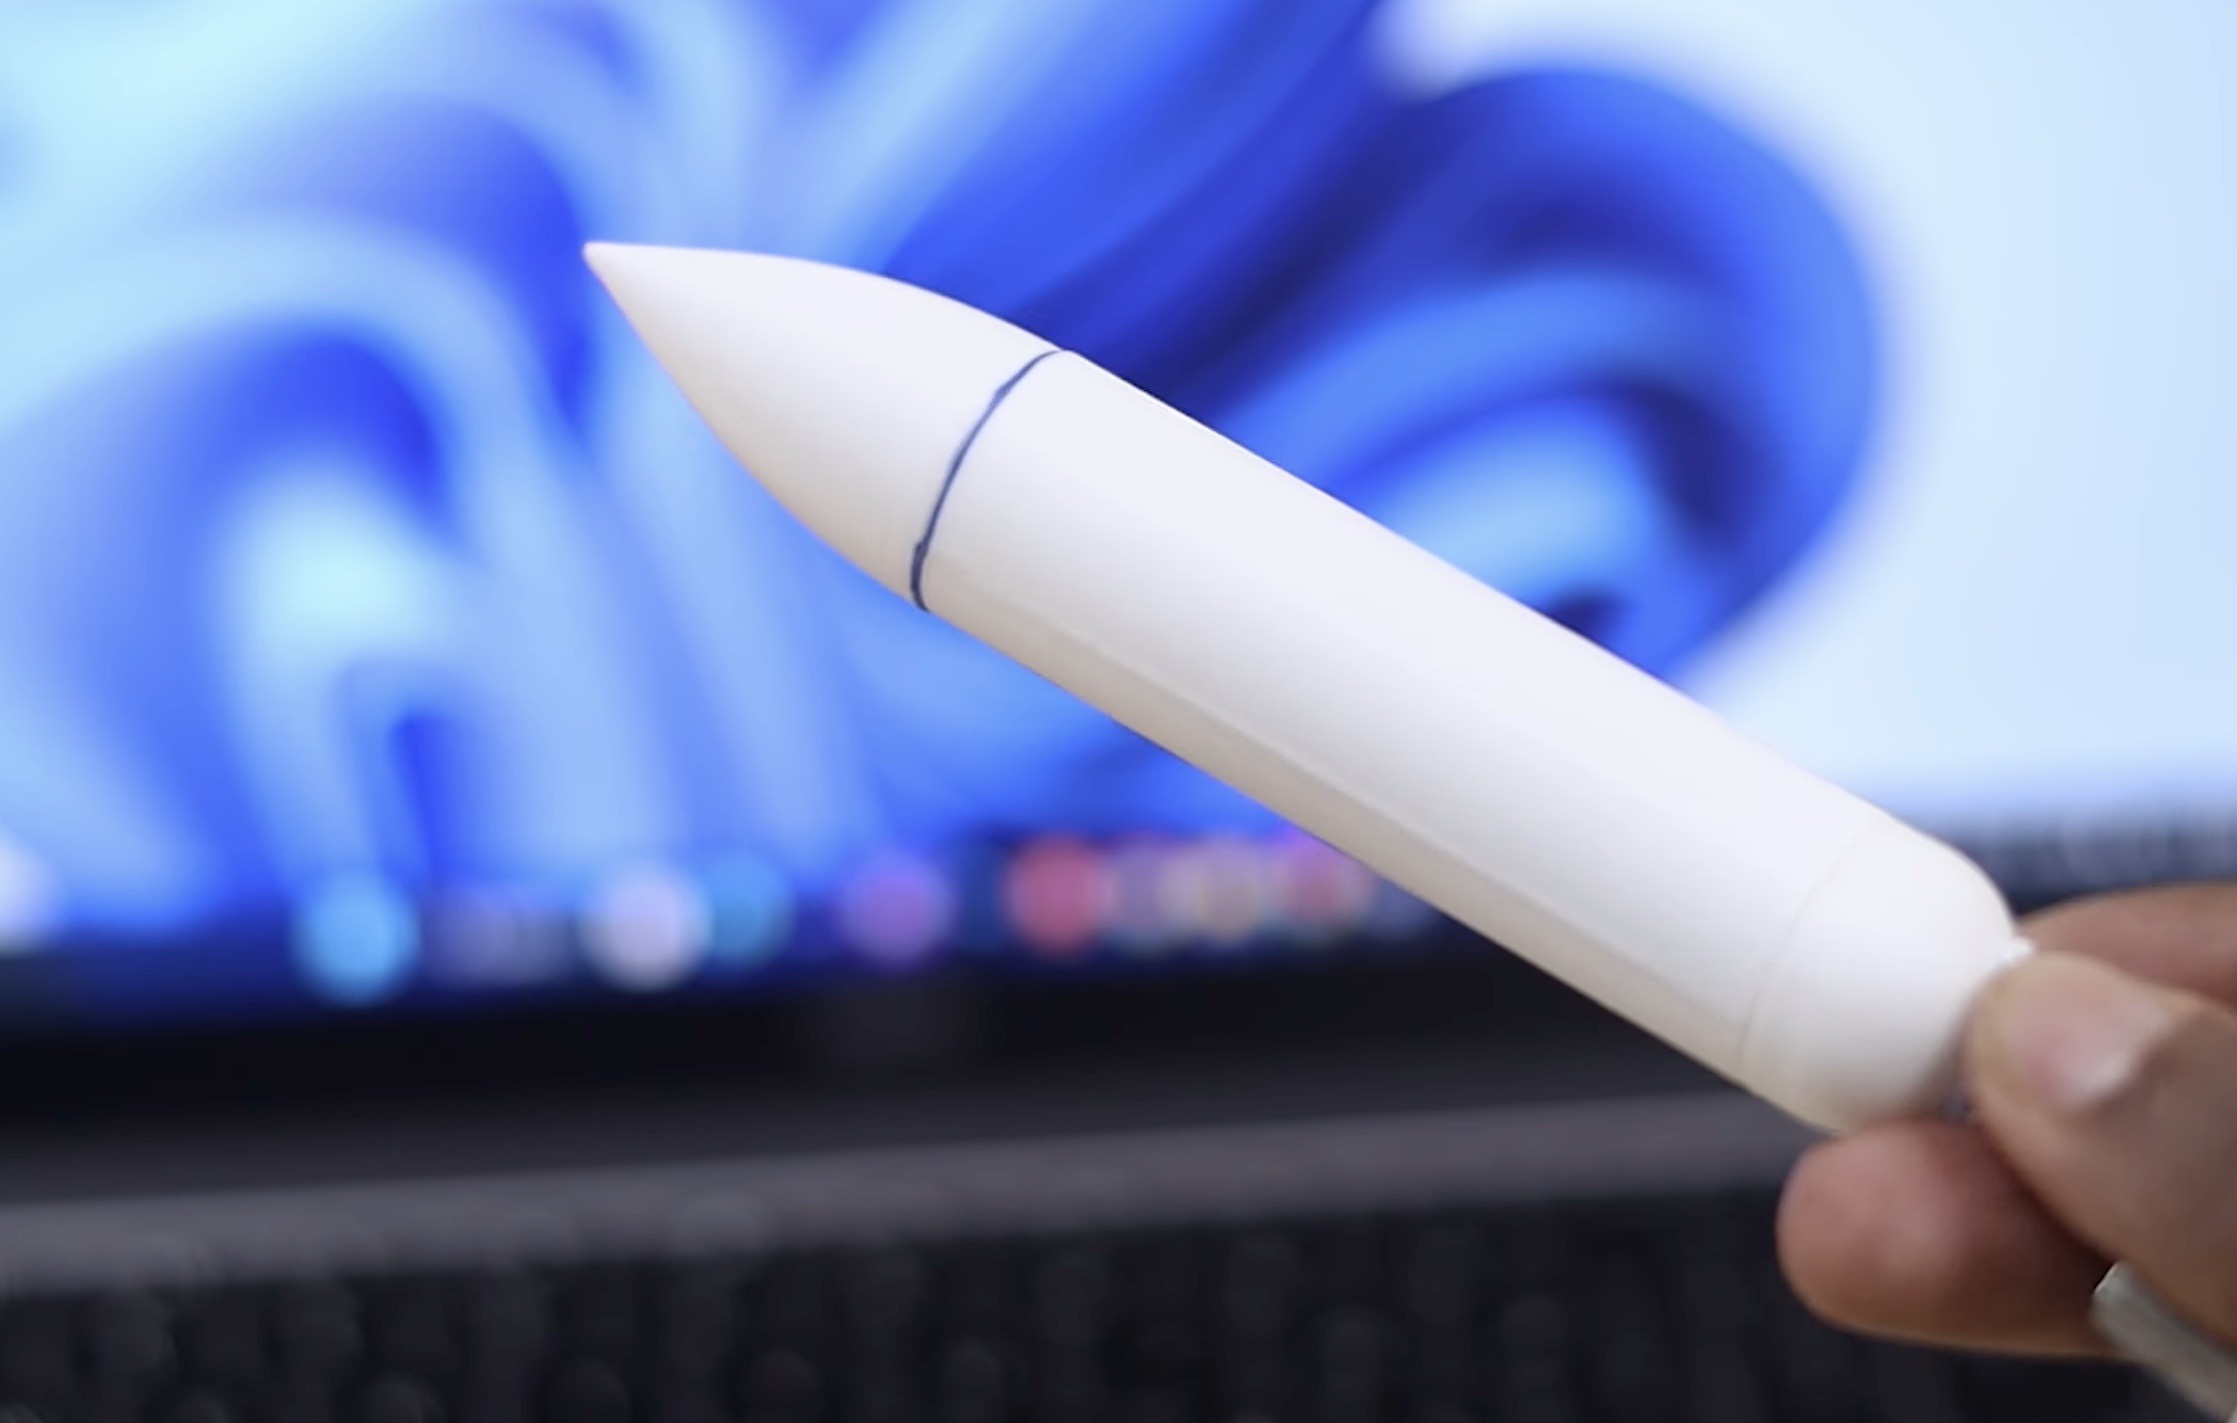 This DIY Apple Pencil writes with gestures